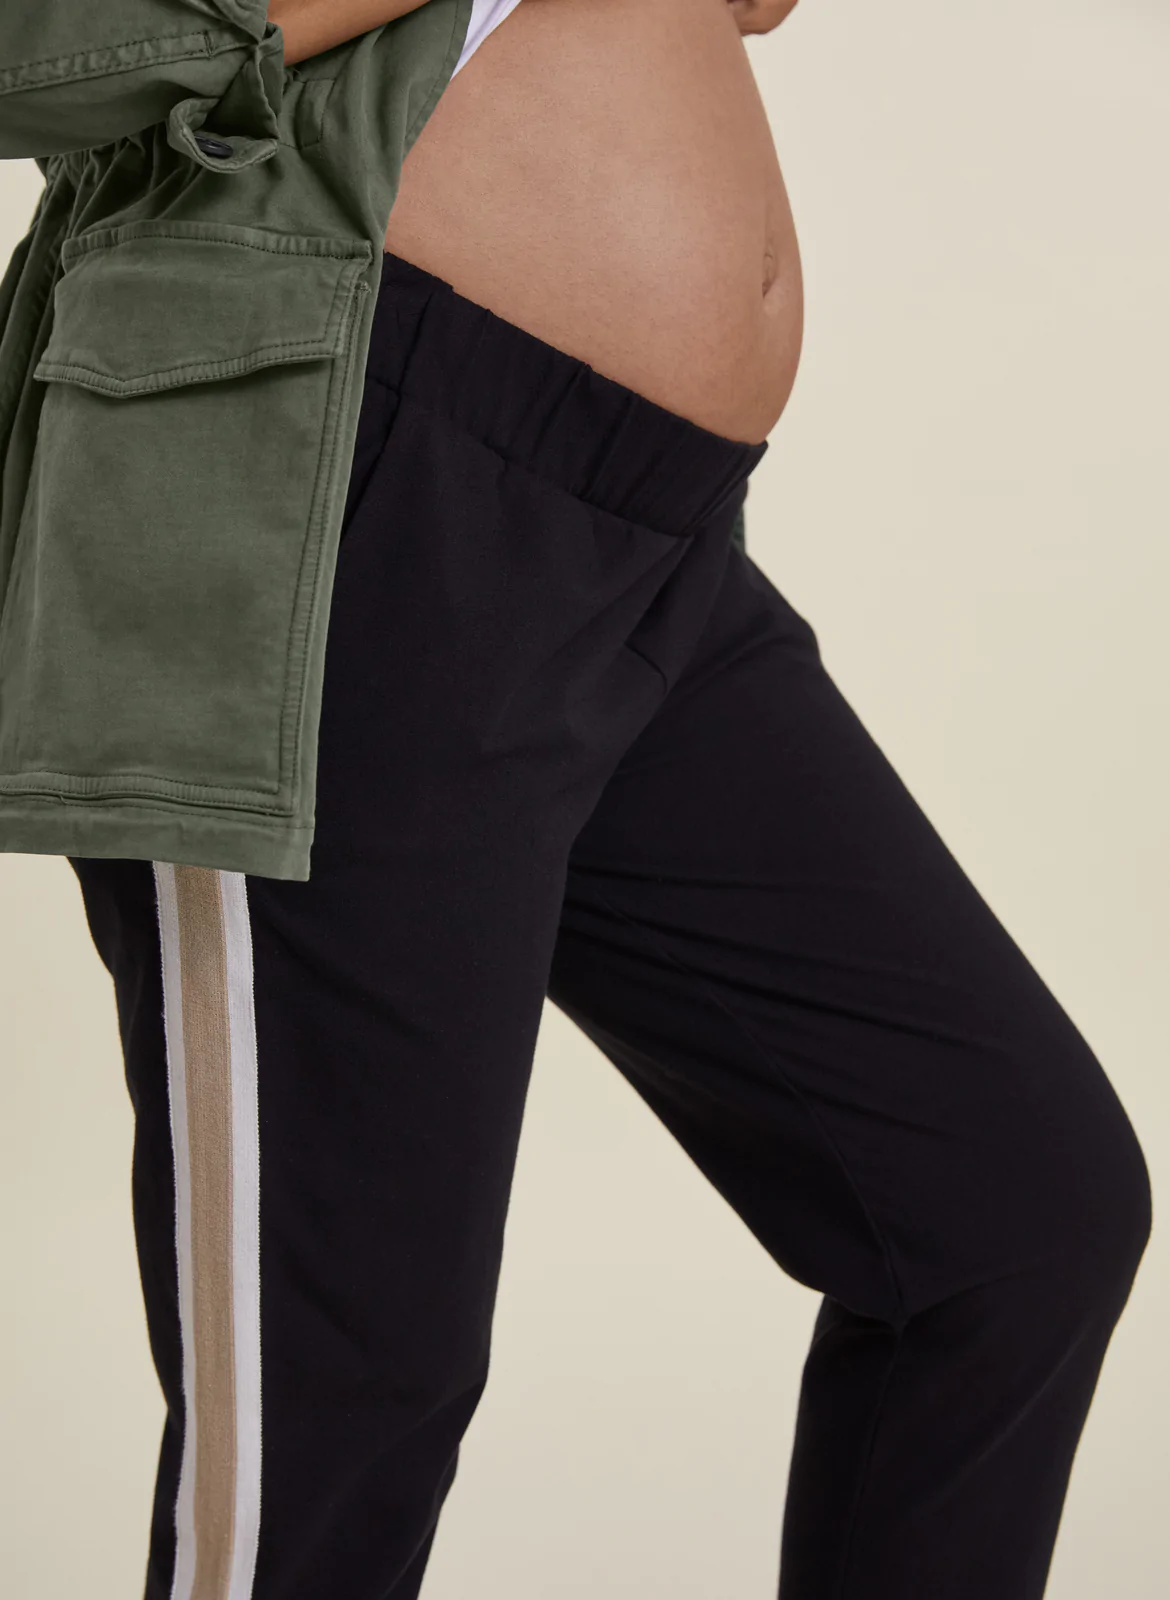 eco friendly maternity pants from isabella oliver